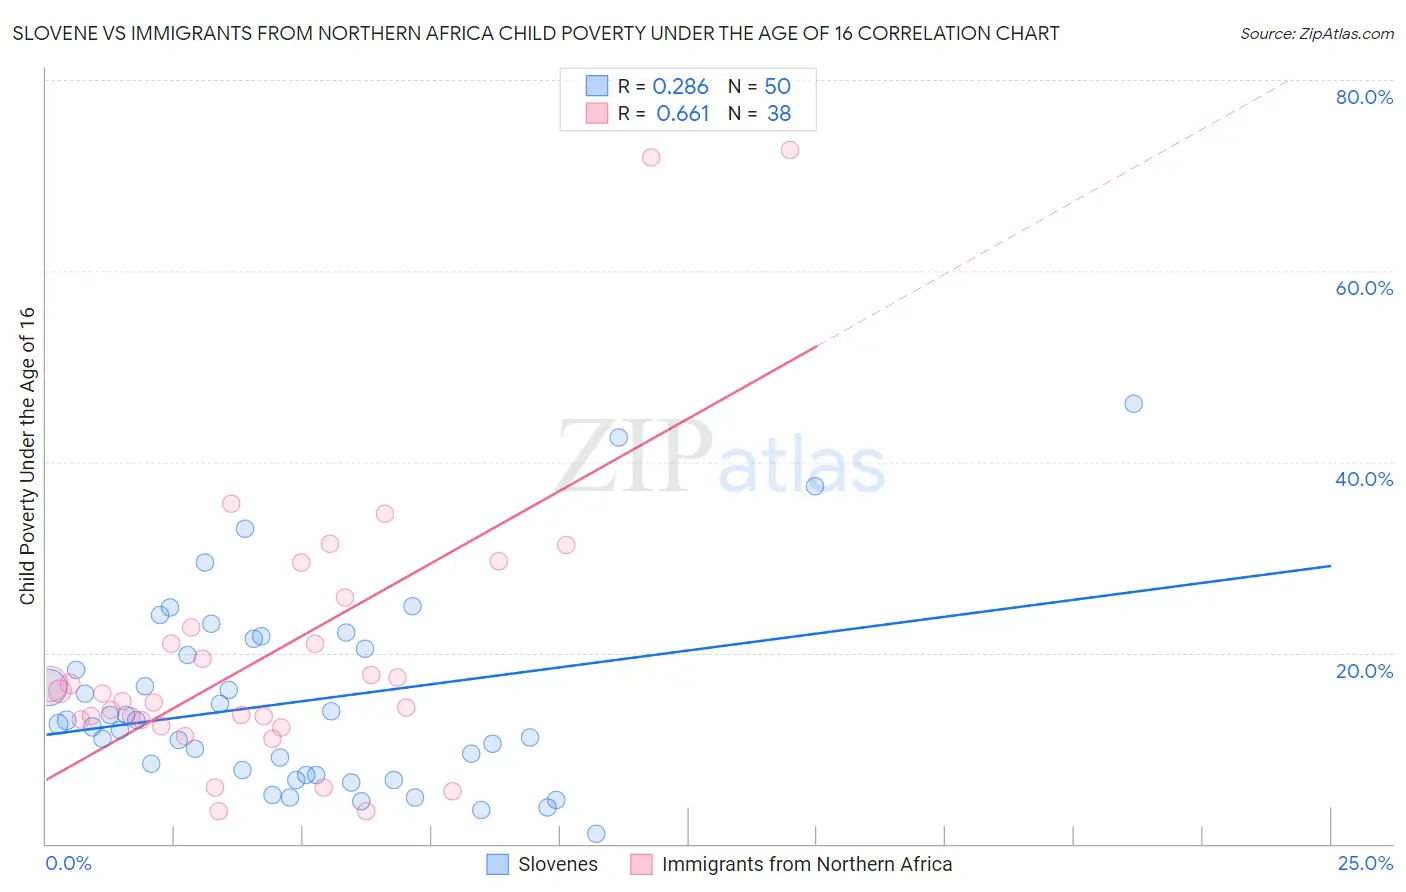 Slovene vs Immigrants from Northern Africa Child Poverty Under the Age of 16